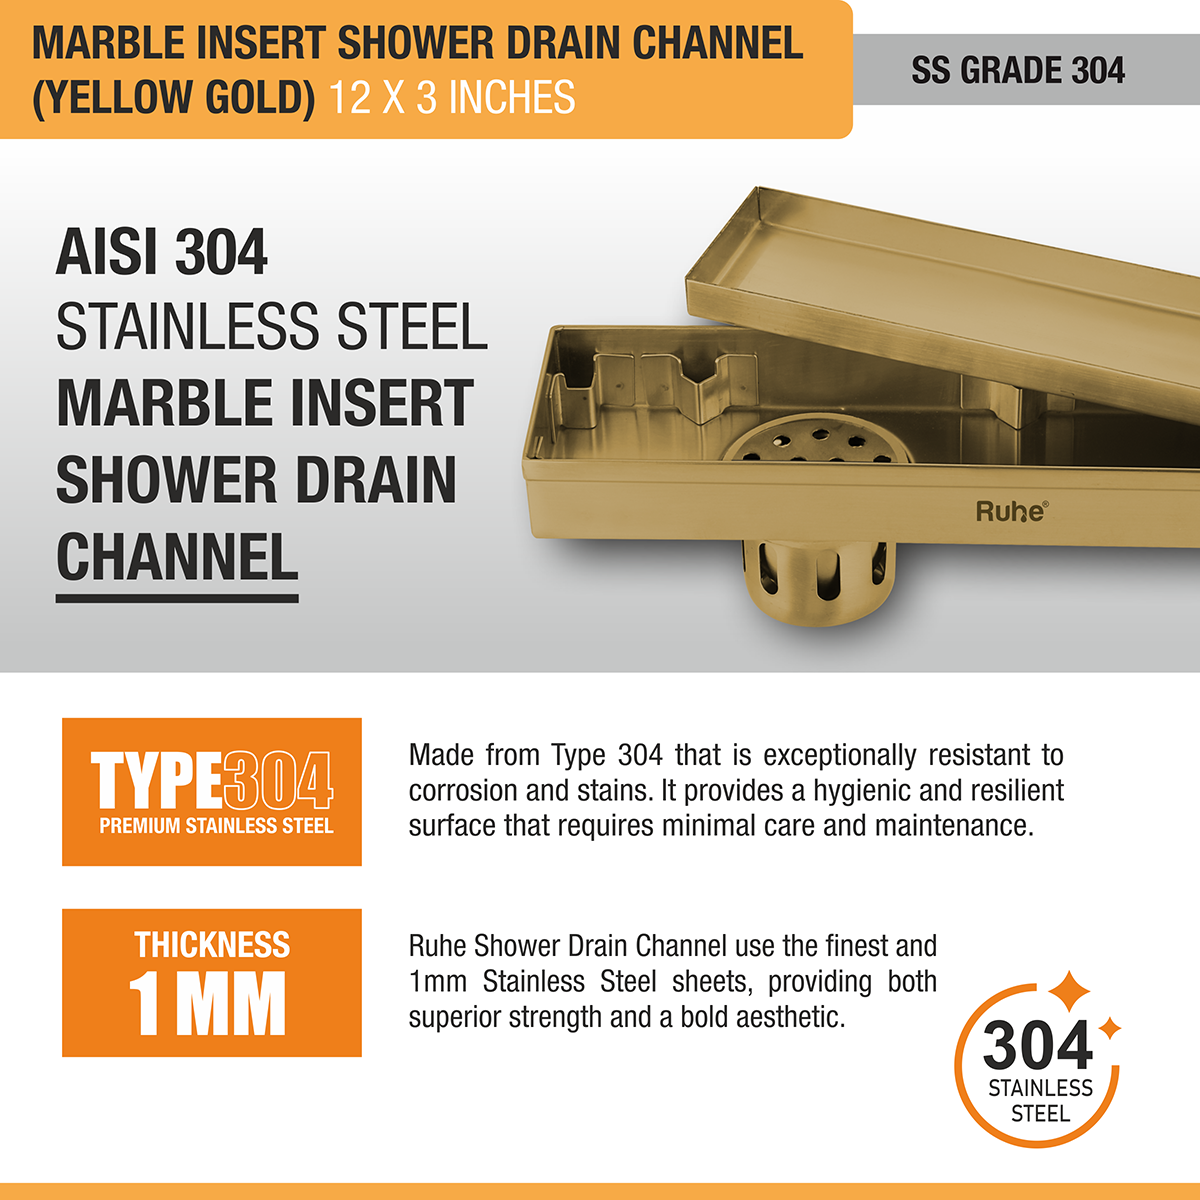 Marble Insert Shower Drain Channel (12 x 3 Inches) YELLOW GOLD PVD Coated stainless steel